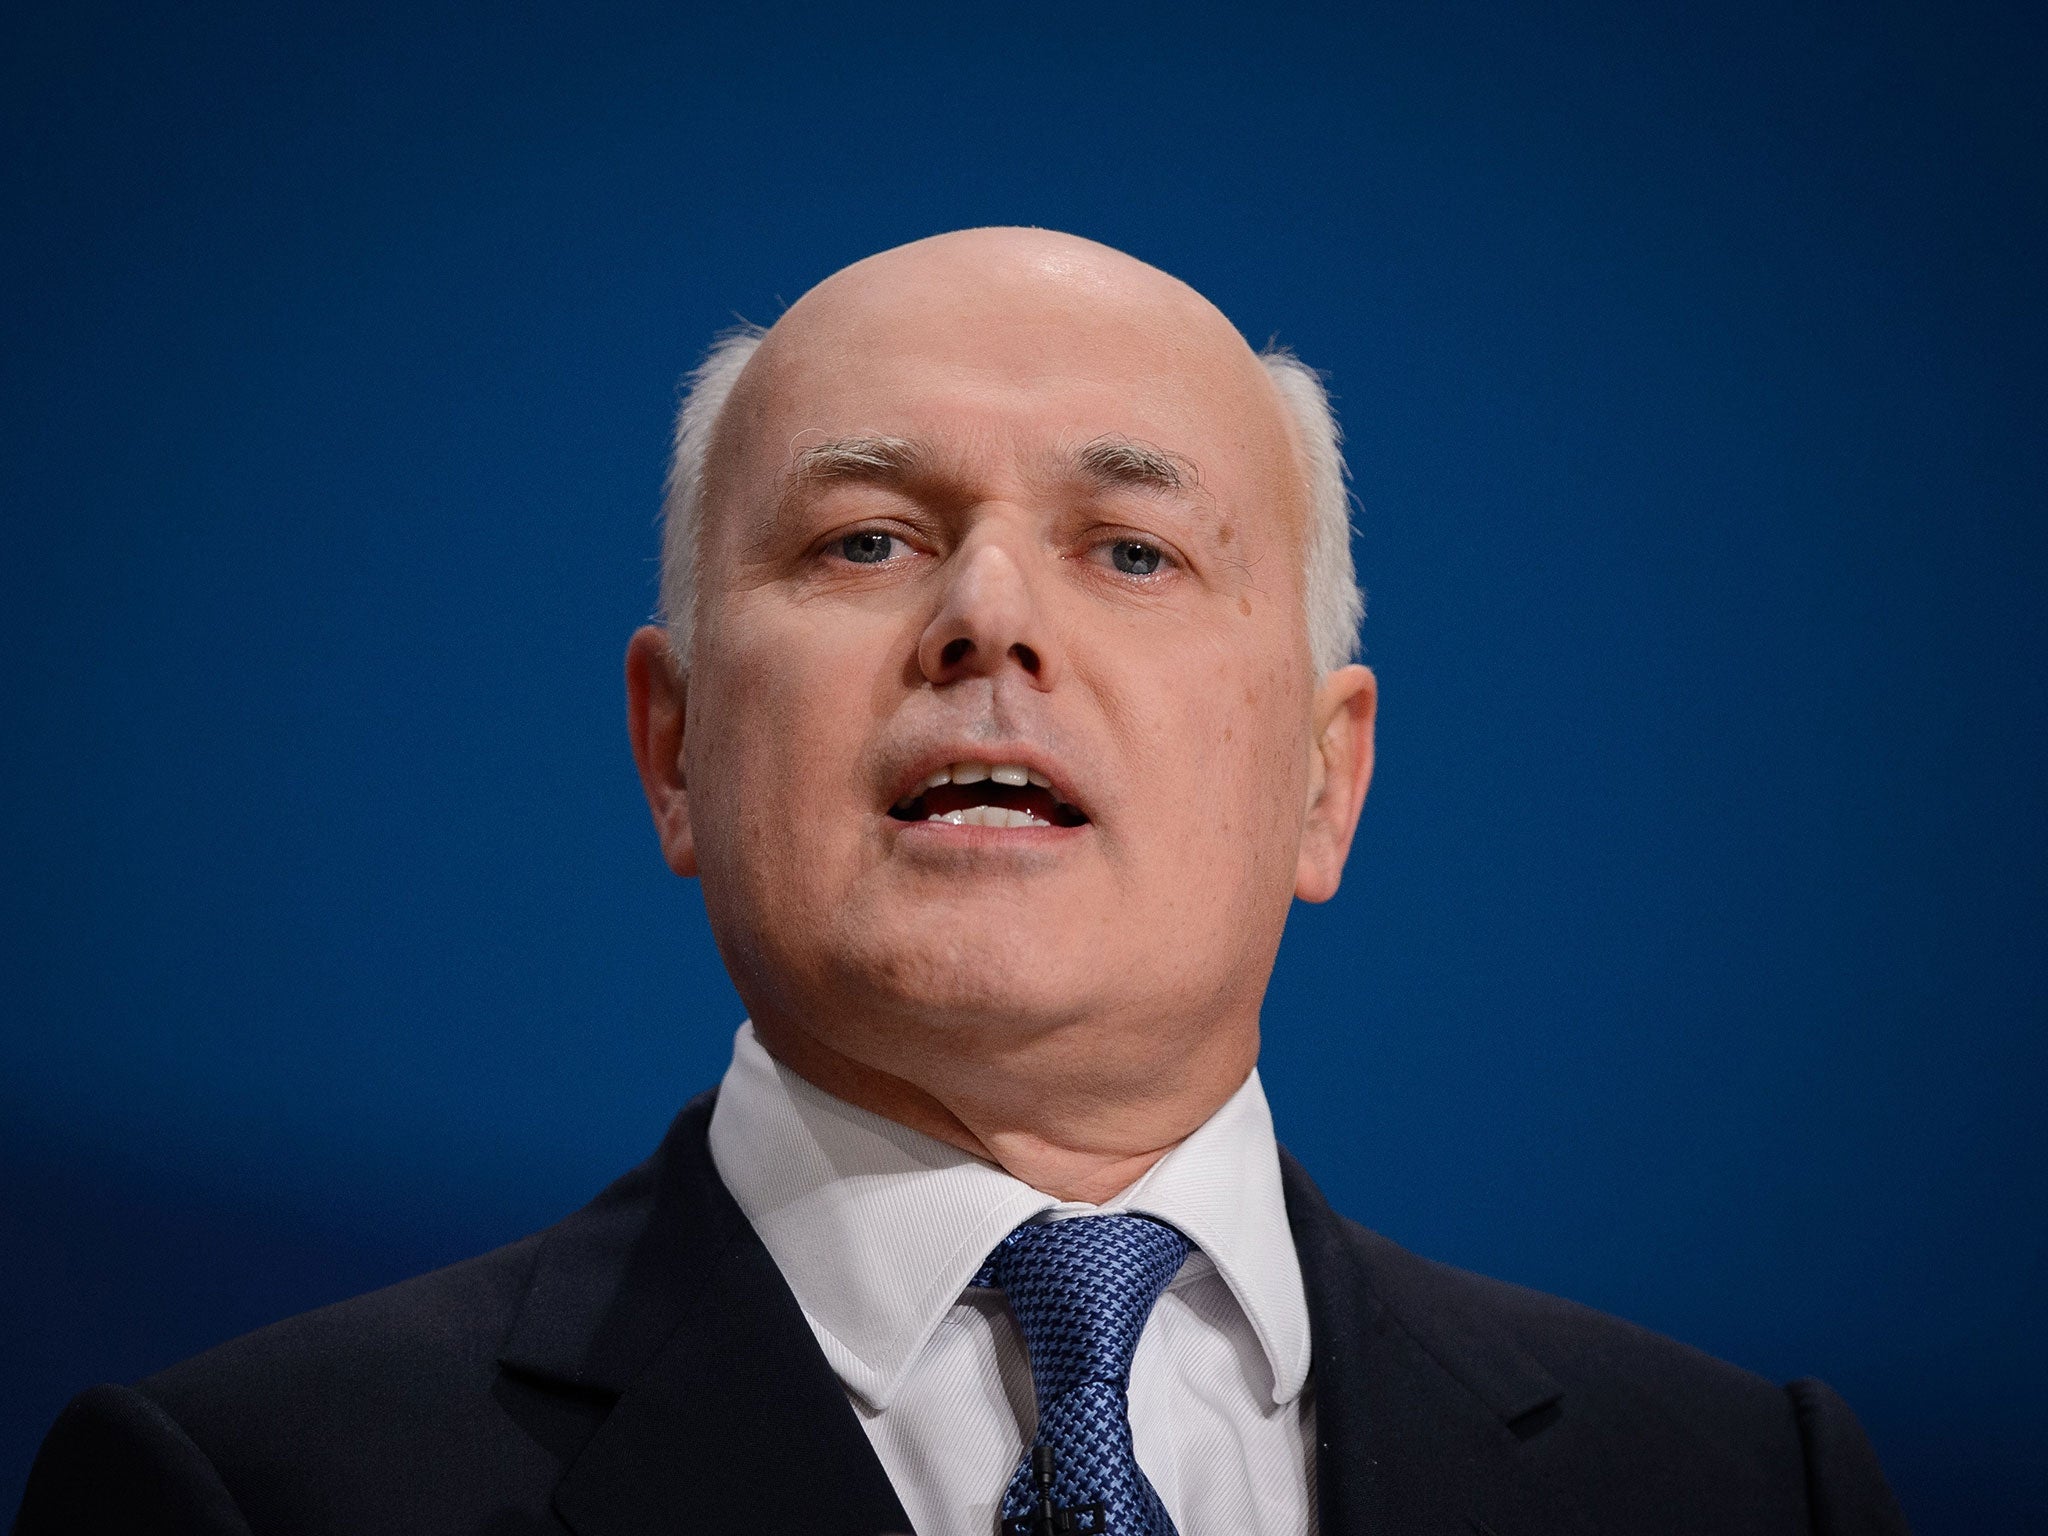 Iain Duncan Smith Should Resign Over Disability Benefit Death Figures Says Jeremy Corbyn